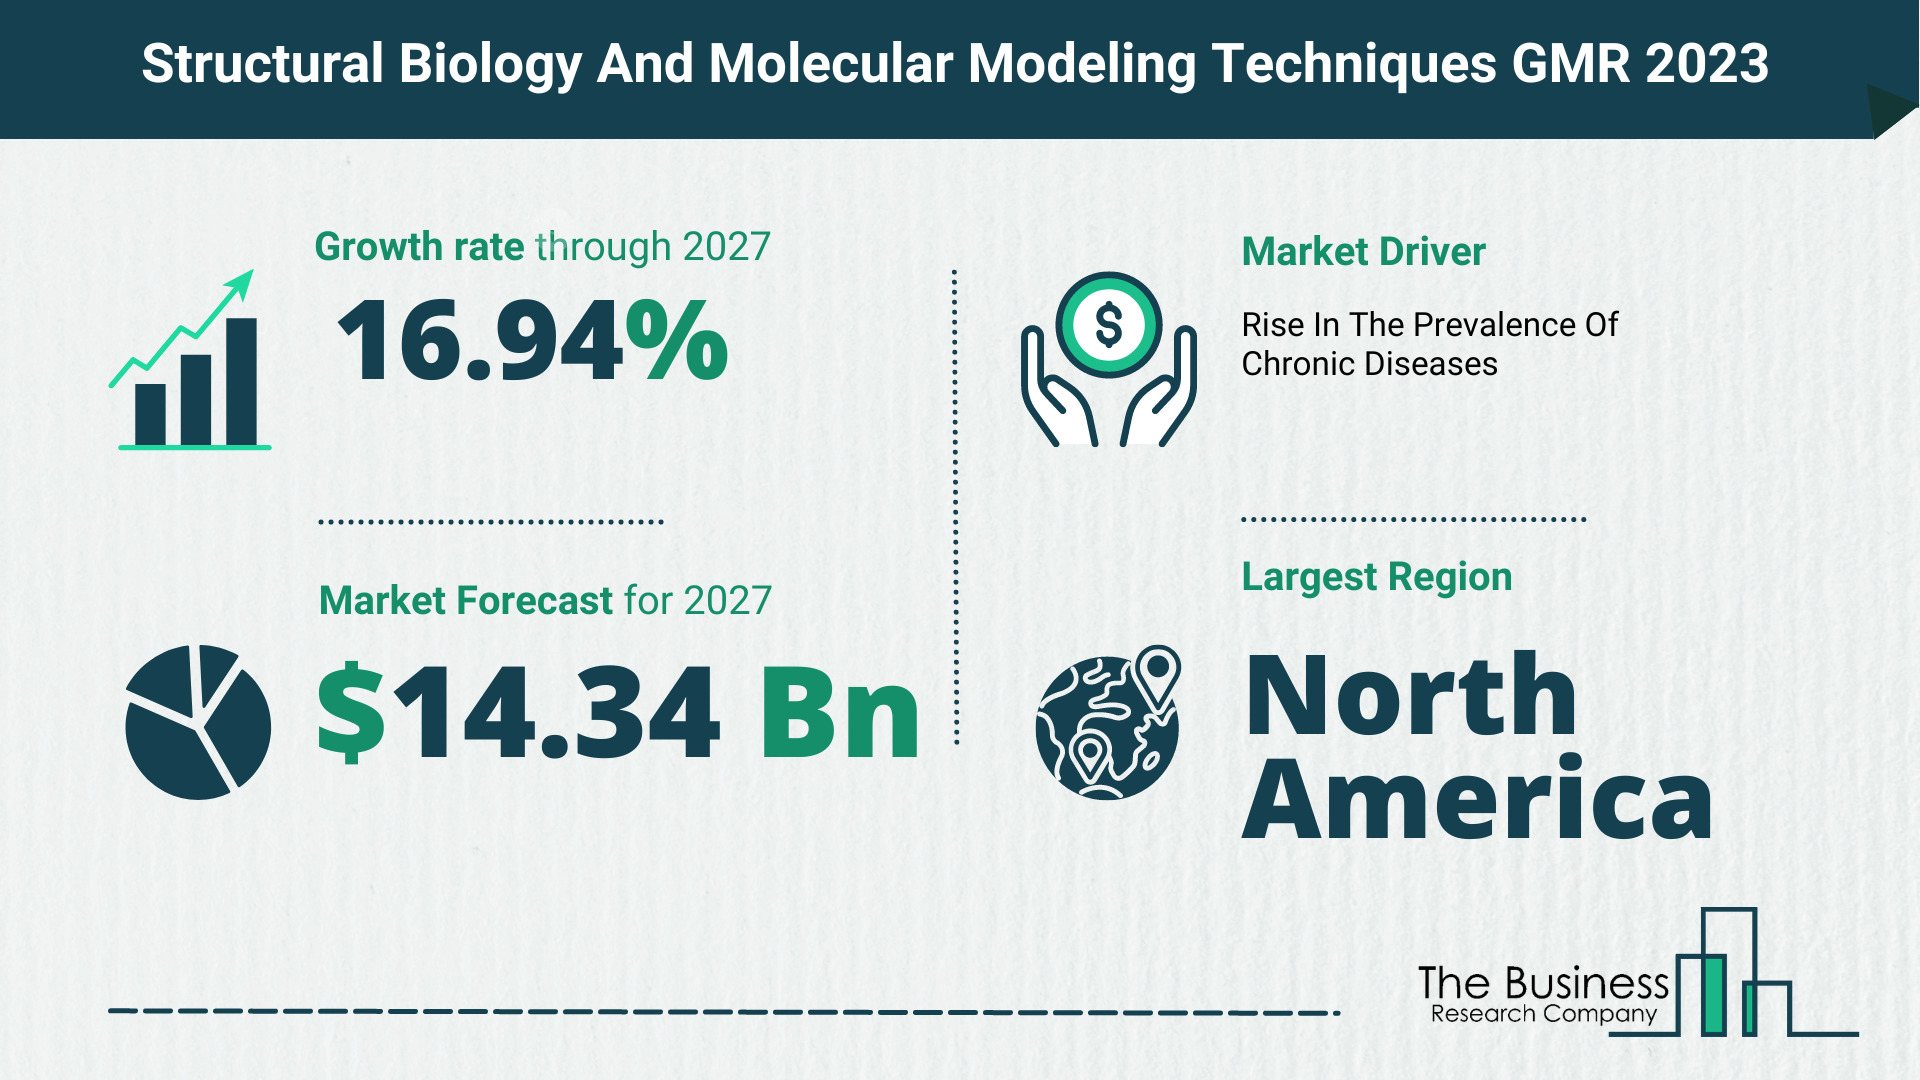 Global Structural Biology And Molecular Modeling Techniques Market Size